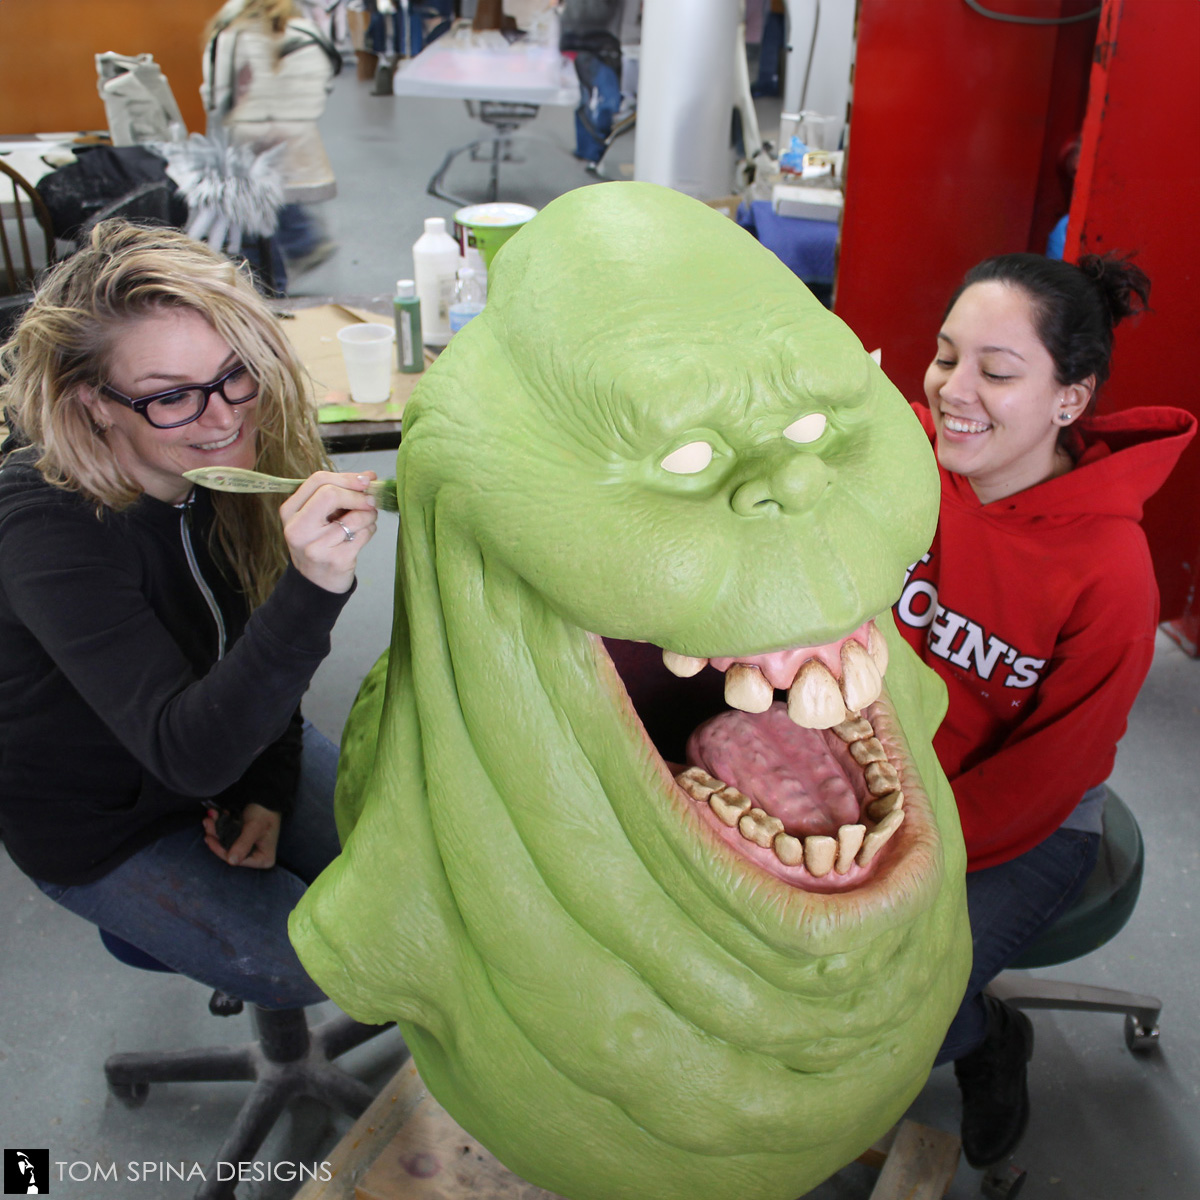 Happy #GhostbustersDay! We love being able to work on restoration & conservation projects from our favorite childhood films. Check out more of our paranormal activities here: bit.ly/TSDGhostbusters

#Ghostbusters #TomSpinaDesigns #movieprops #whoyagonnacall